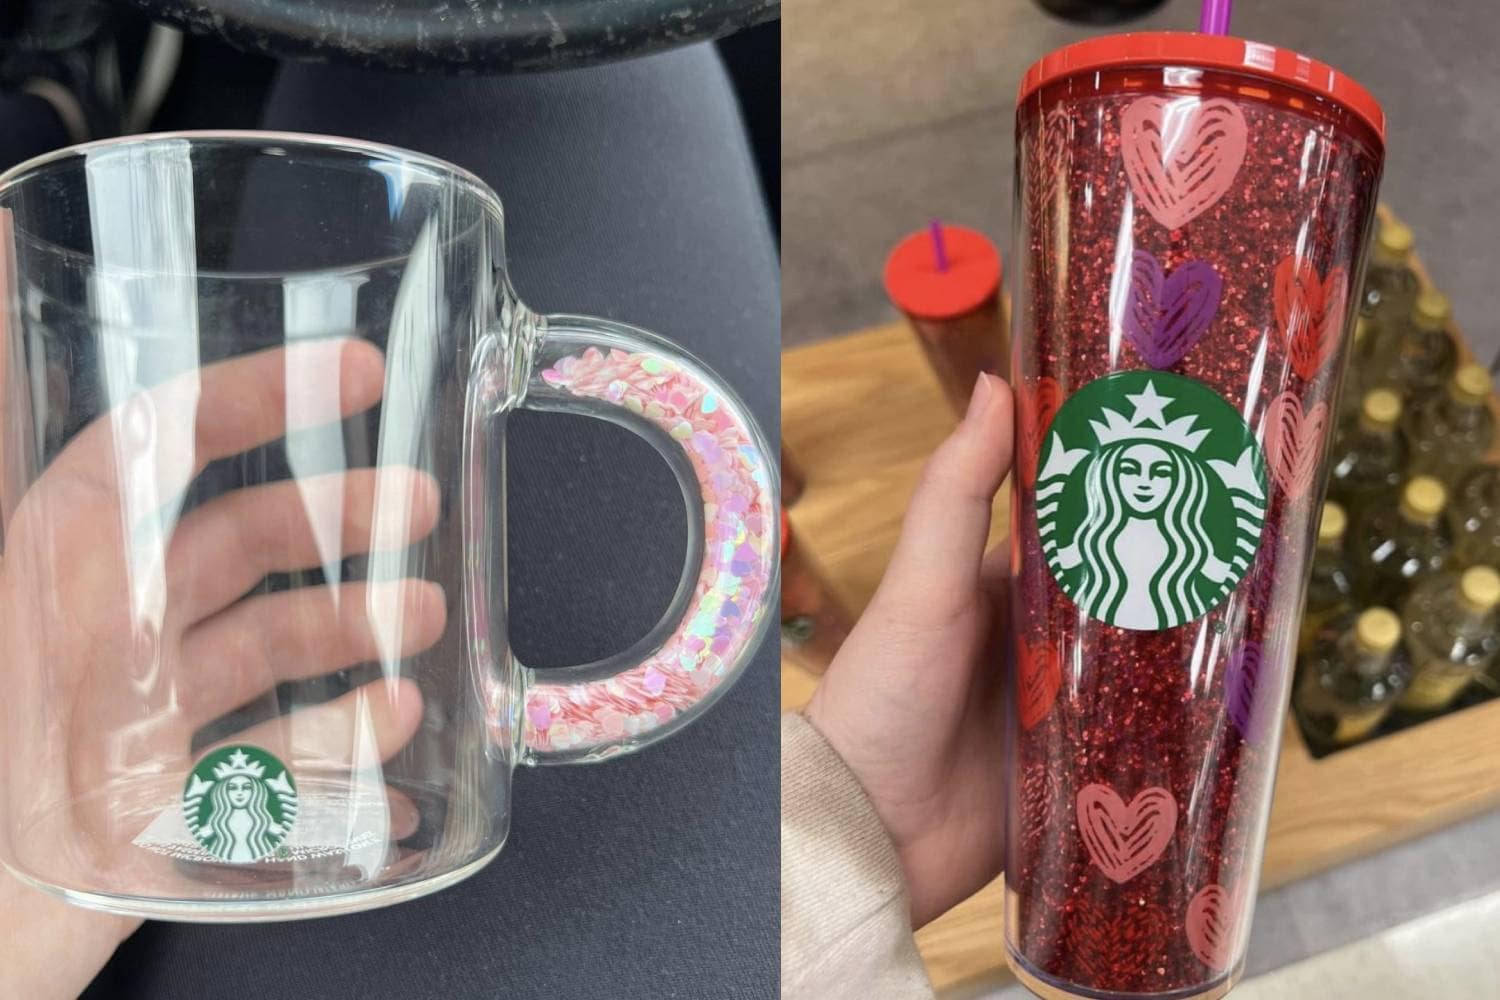 Your Look at Starbucks Lunar New Year Cups For the Year of the Rabbit